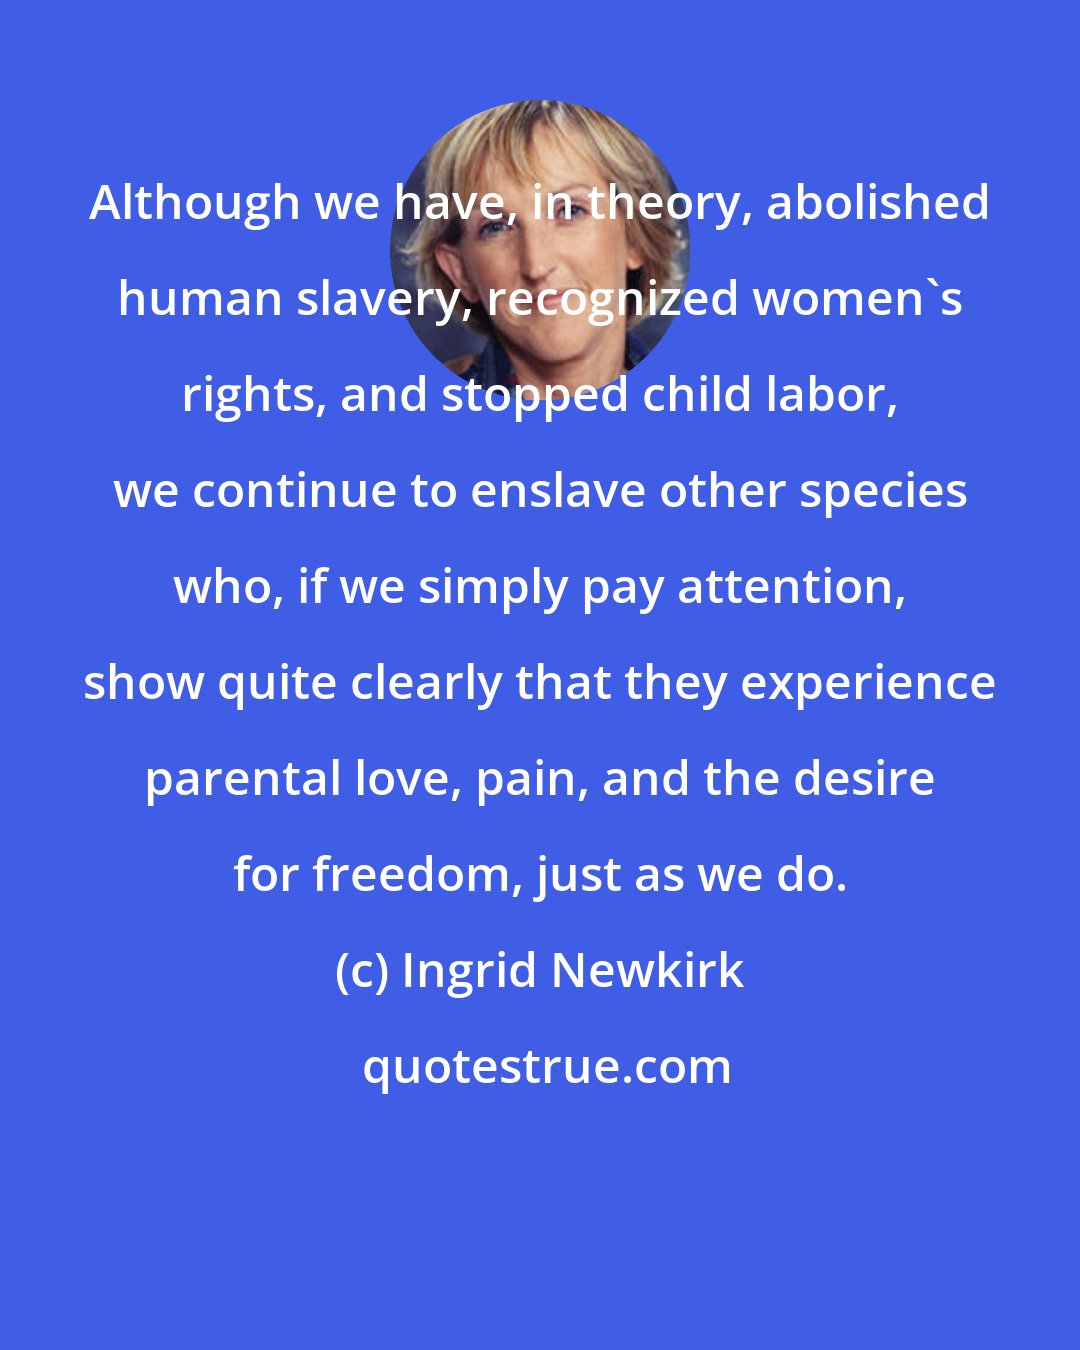 Ingrid Newkirk: Although we have, in theory, abolished human slavery, recognized women's rights, and stopped child labor, we continue to enslave other species who, if we simply pay attention, show quite clearly that they experience parental love, pain, and the desire for freedom, just as we do.